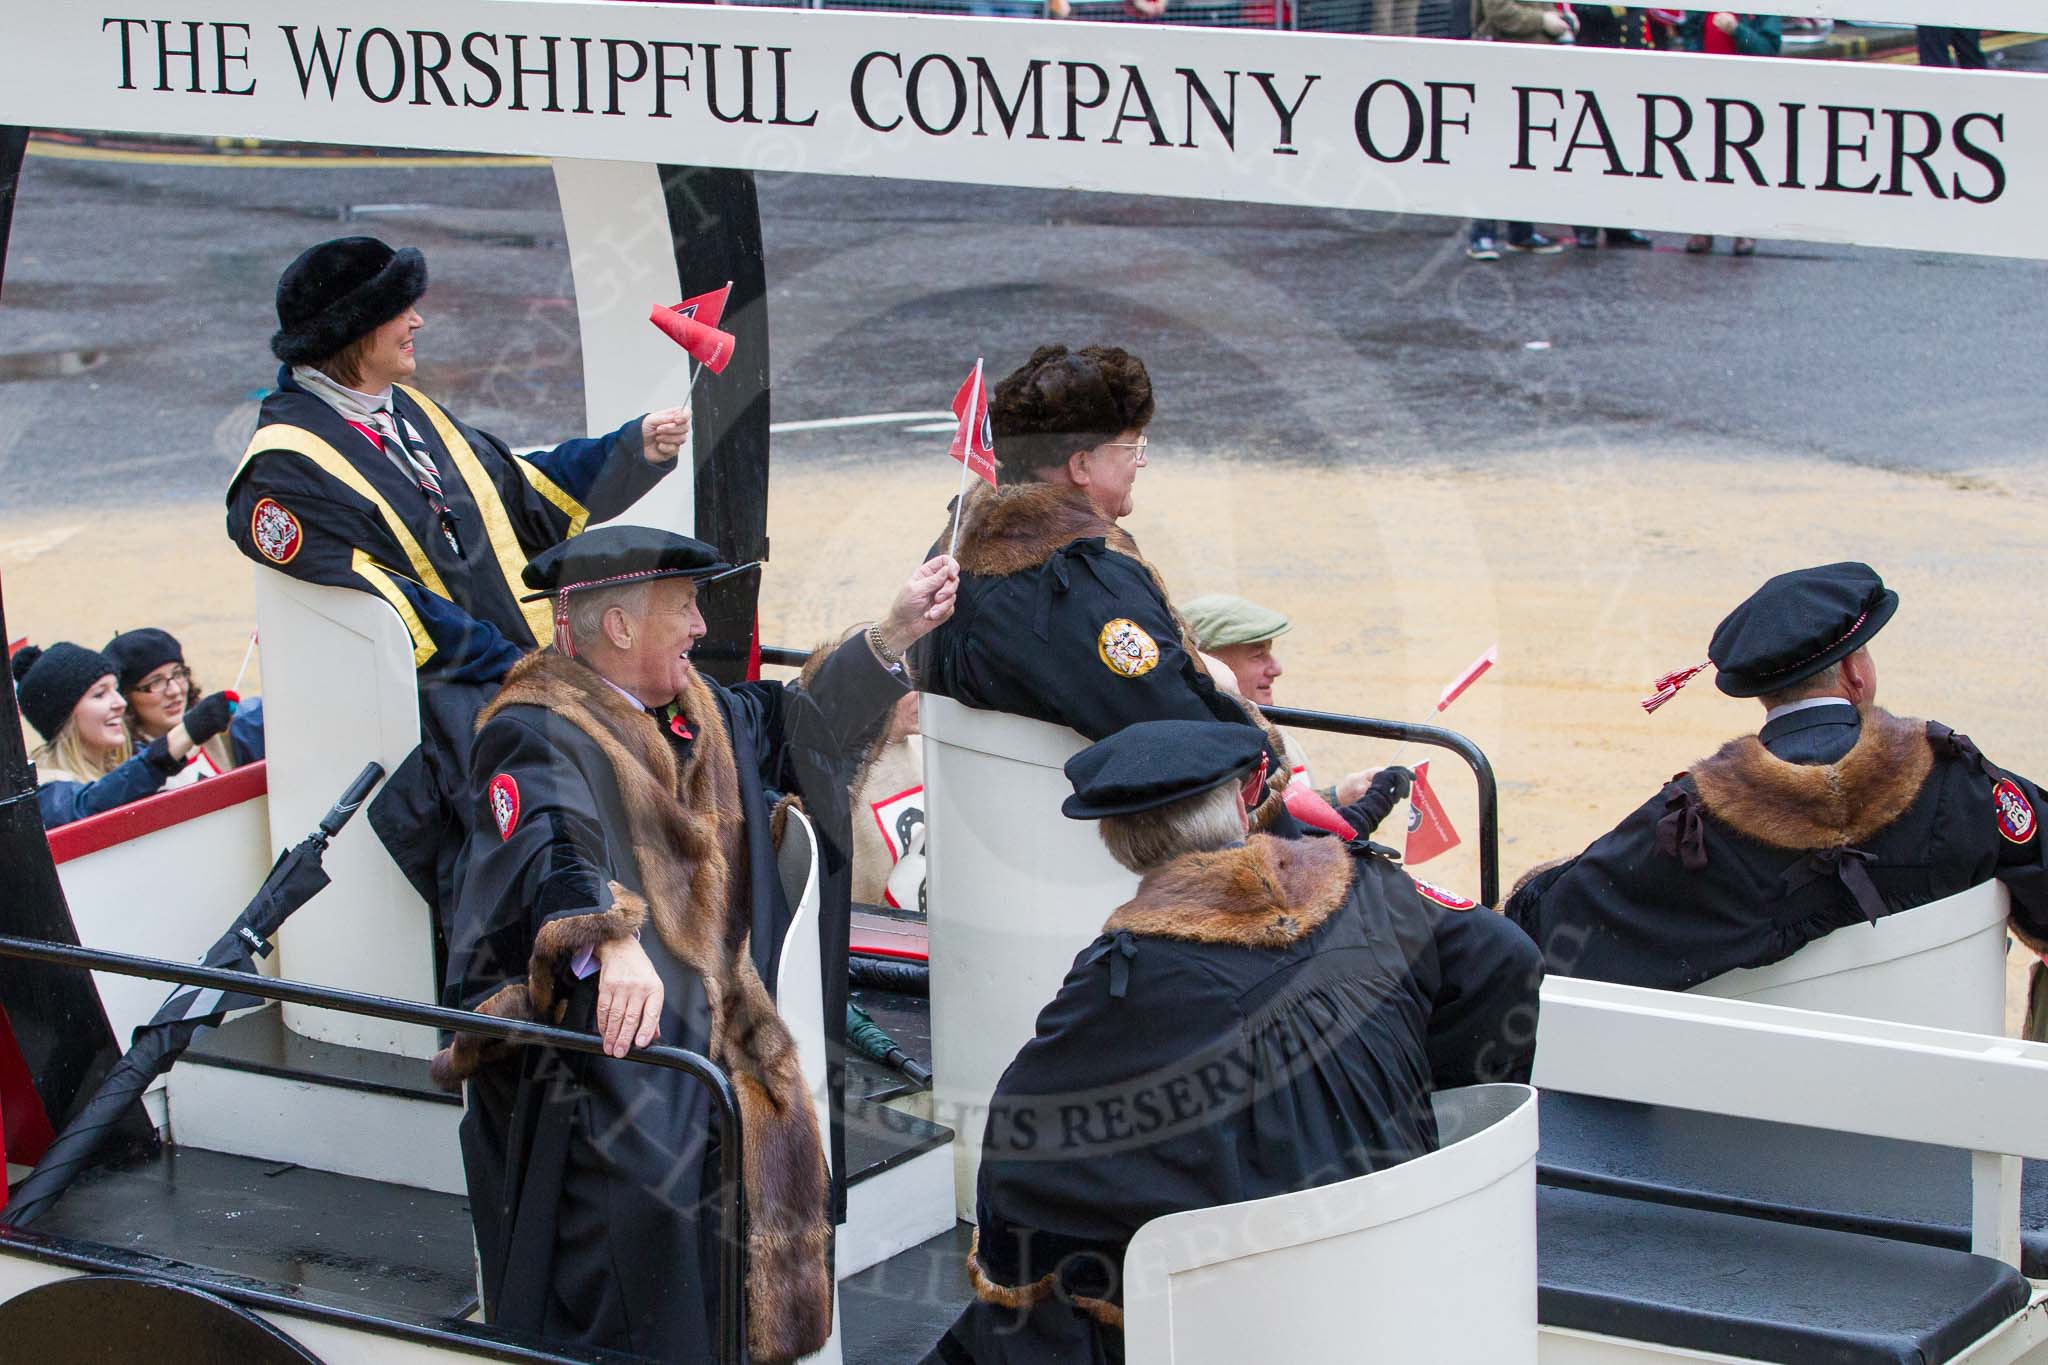 Lord Mayor's Show 2012: Entry 14 - Worshipful Company of Farriers..
Press stand opposite Mansion House, City of London,
London,
Greater London,
United Kingdom,
on 10 November 2012 at 11:06, image #306